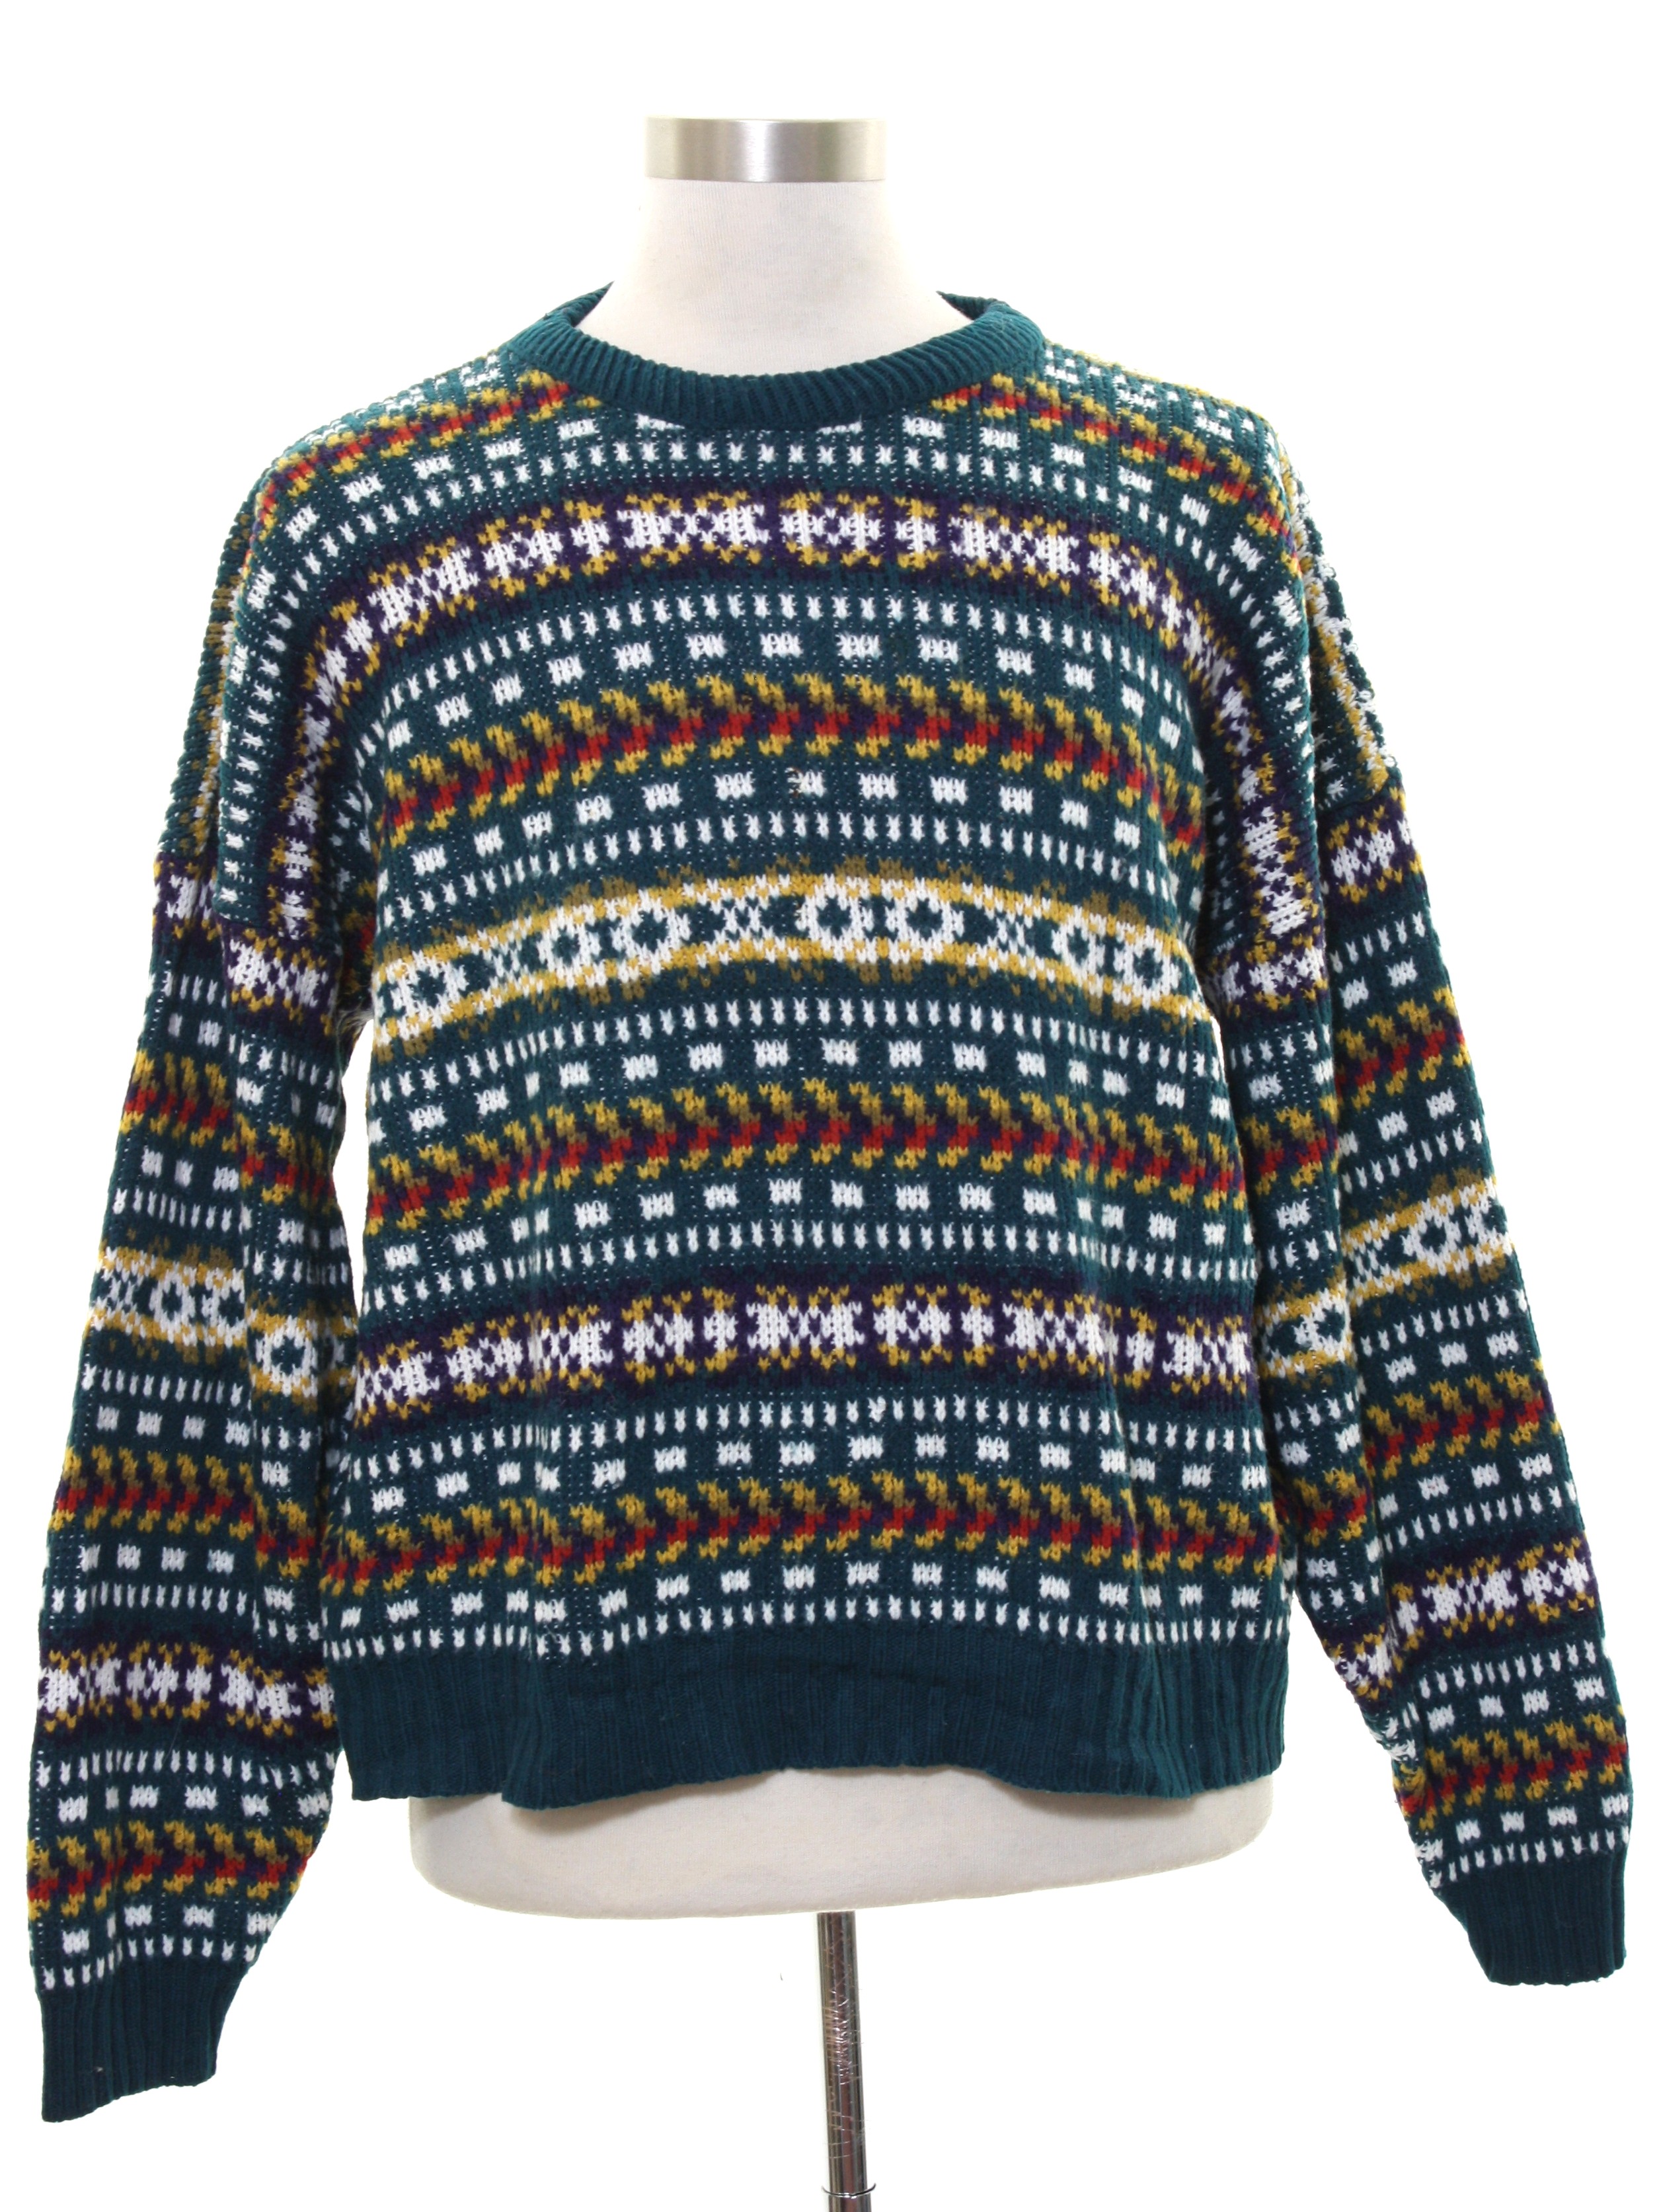 1980's Sweater (Scandia): 80s -Scandia- Mens teal background acrylic ...